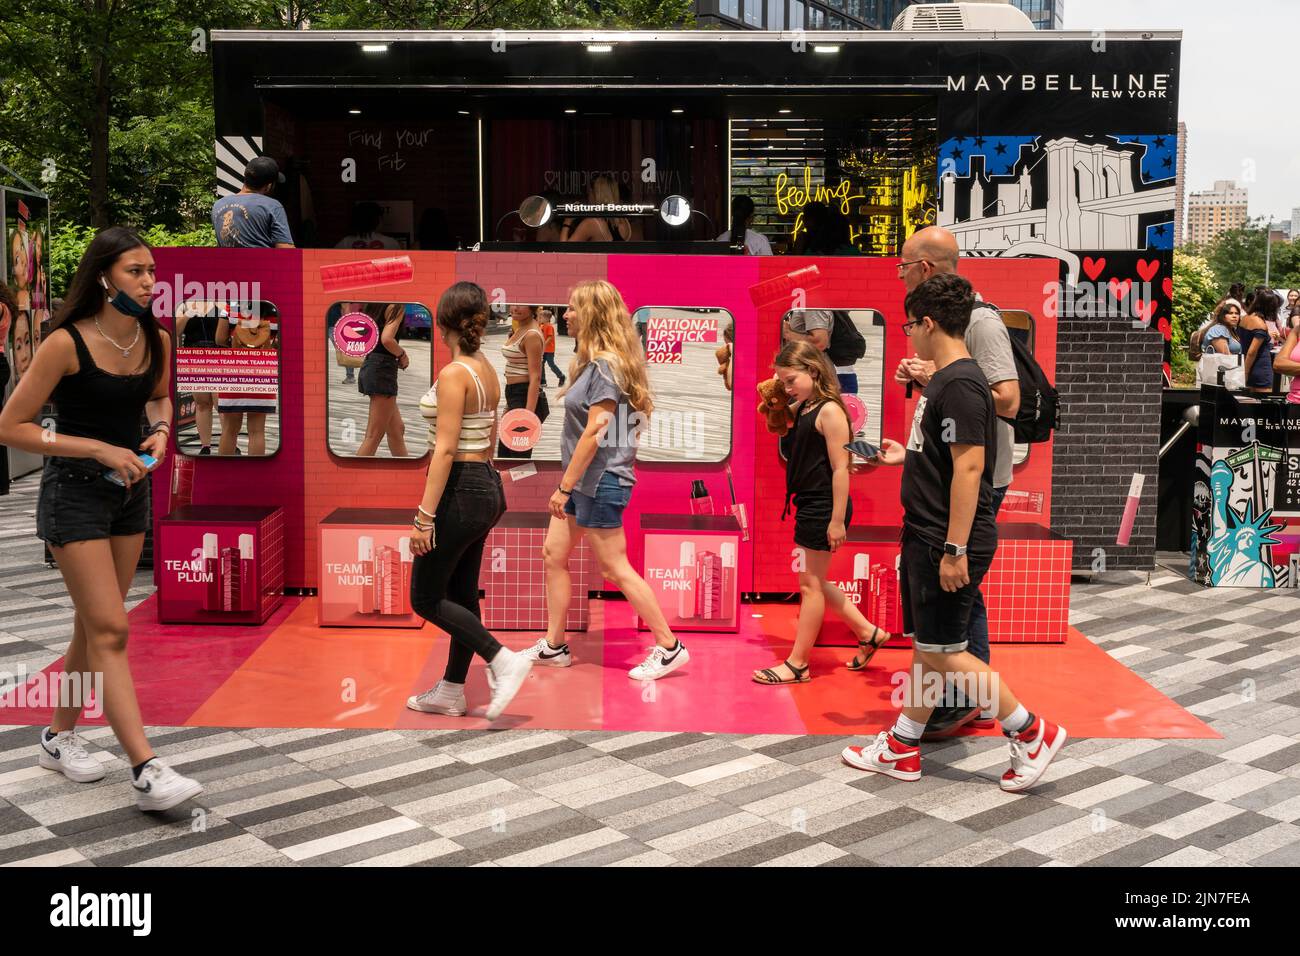 Visitors celebrate National Lipstick Day at a Maybelline pop-up branding activation in Hudson Yards in New York on Thursday, July 28, 2022. Visitors were treated to free product samples, a lip “touch up” and other attractions. Maybelline is a brand of L’Oreal. (© Richard B. Levine) Stock Photo